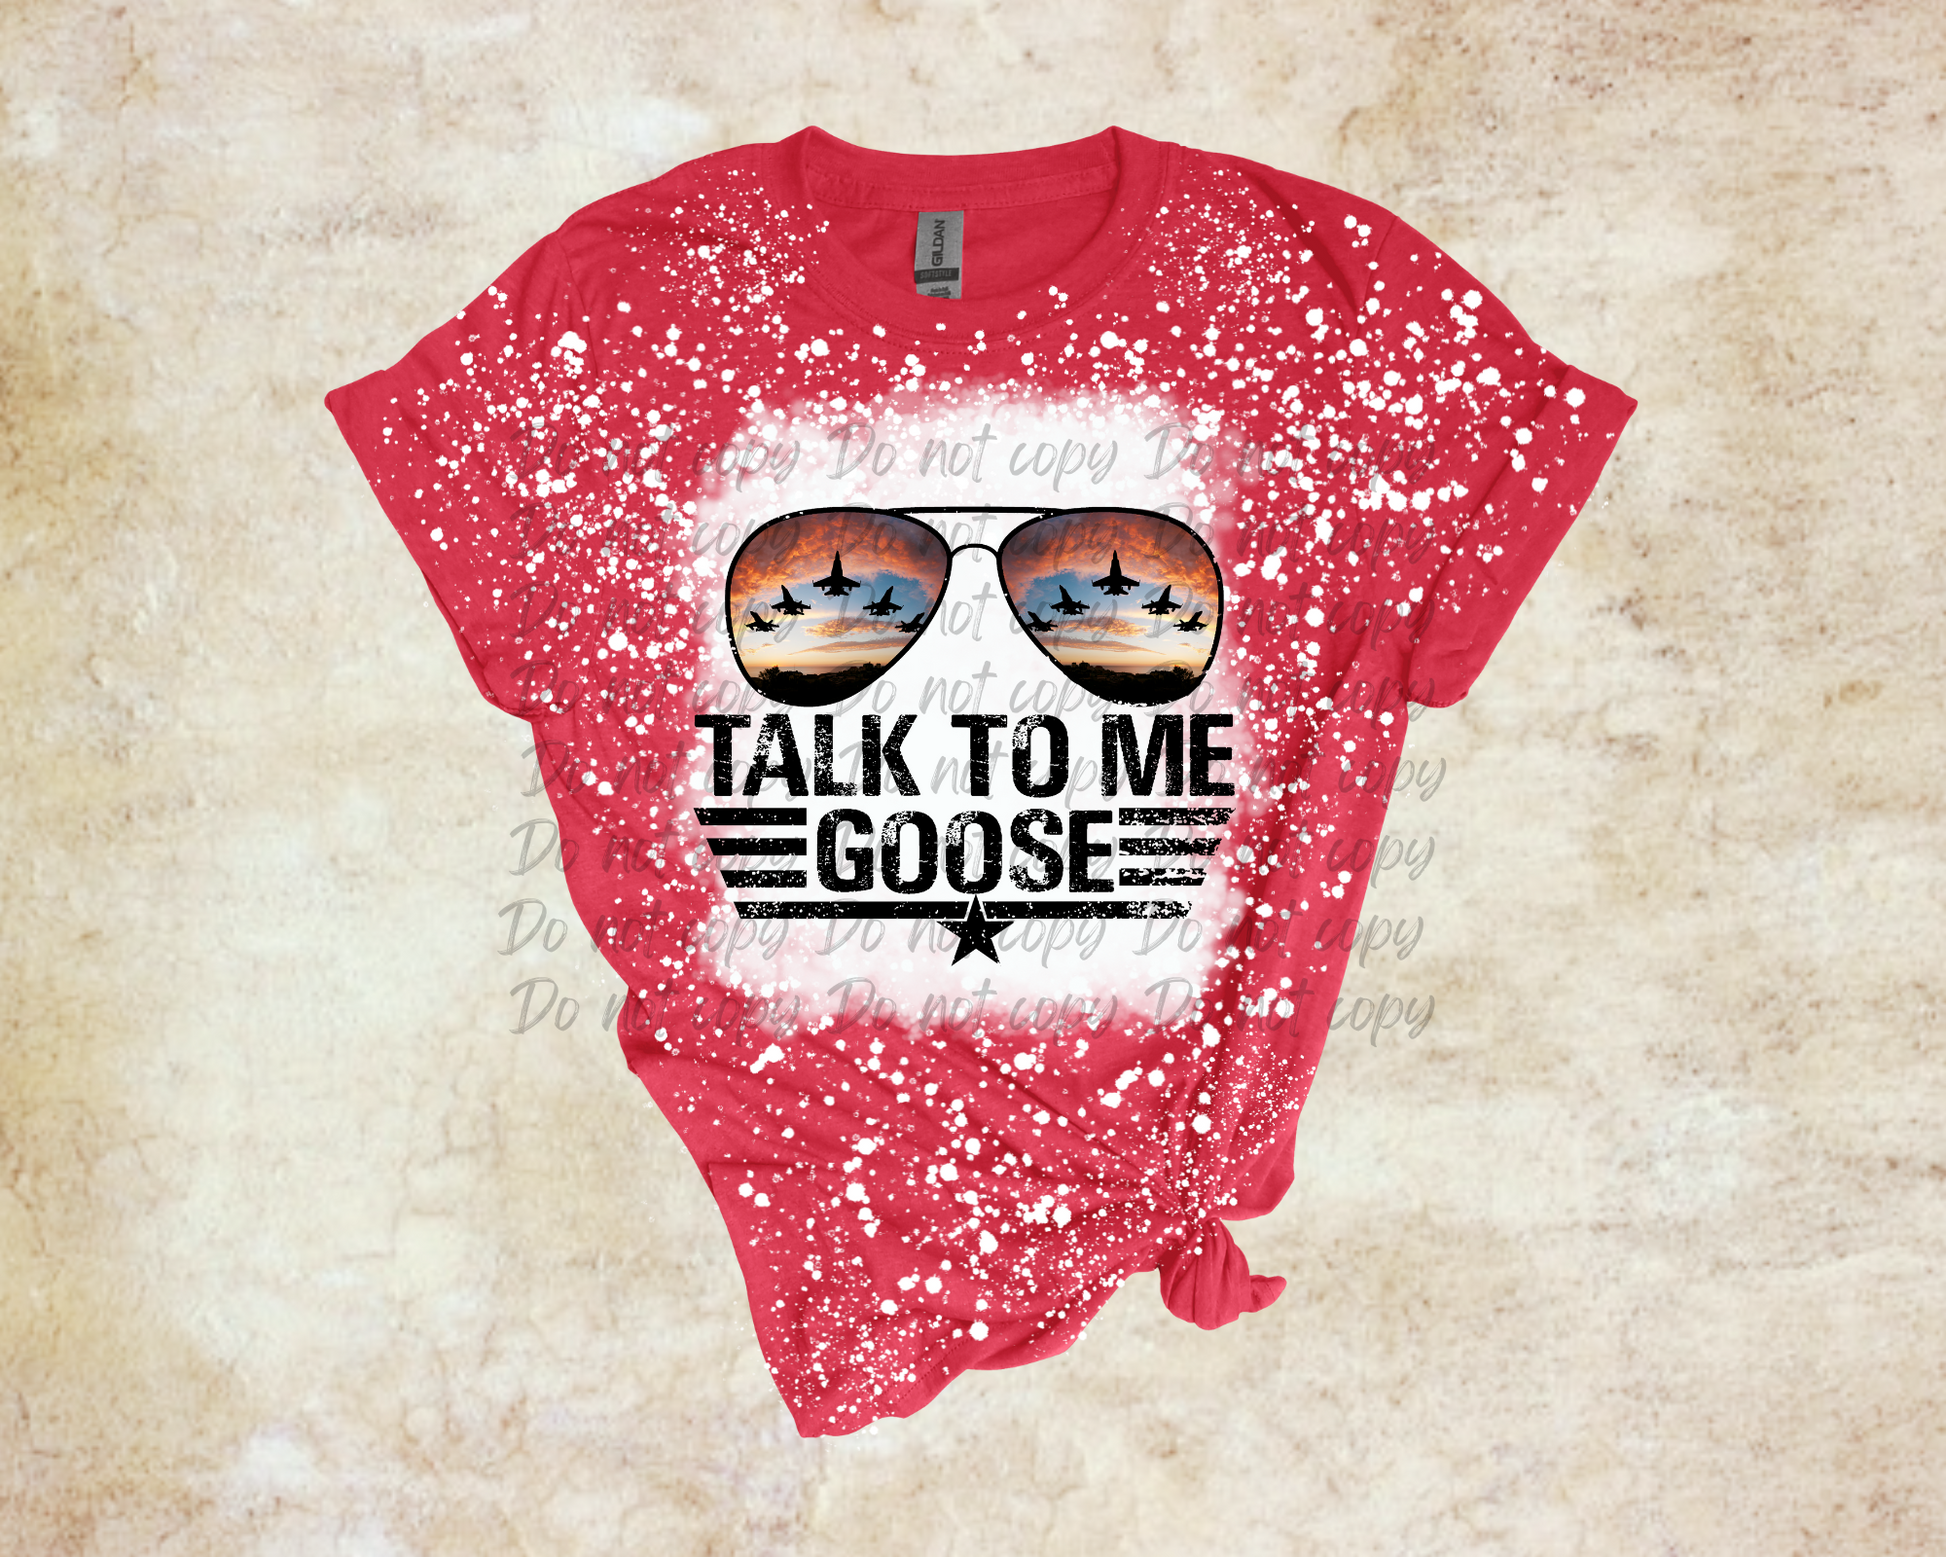 Talk to me goose fighter jet glasses bleached shirt - Mayan Sub Shop